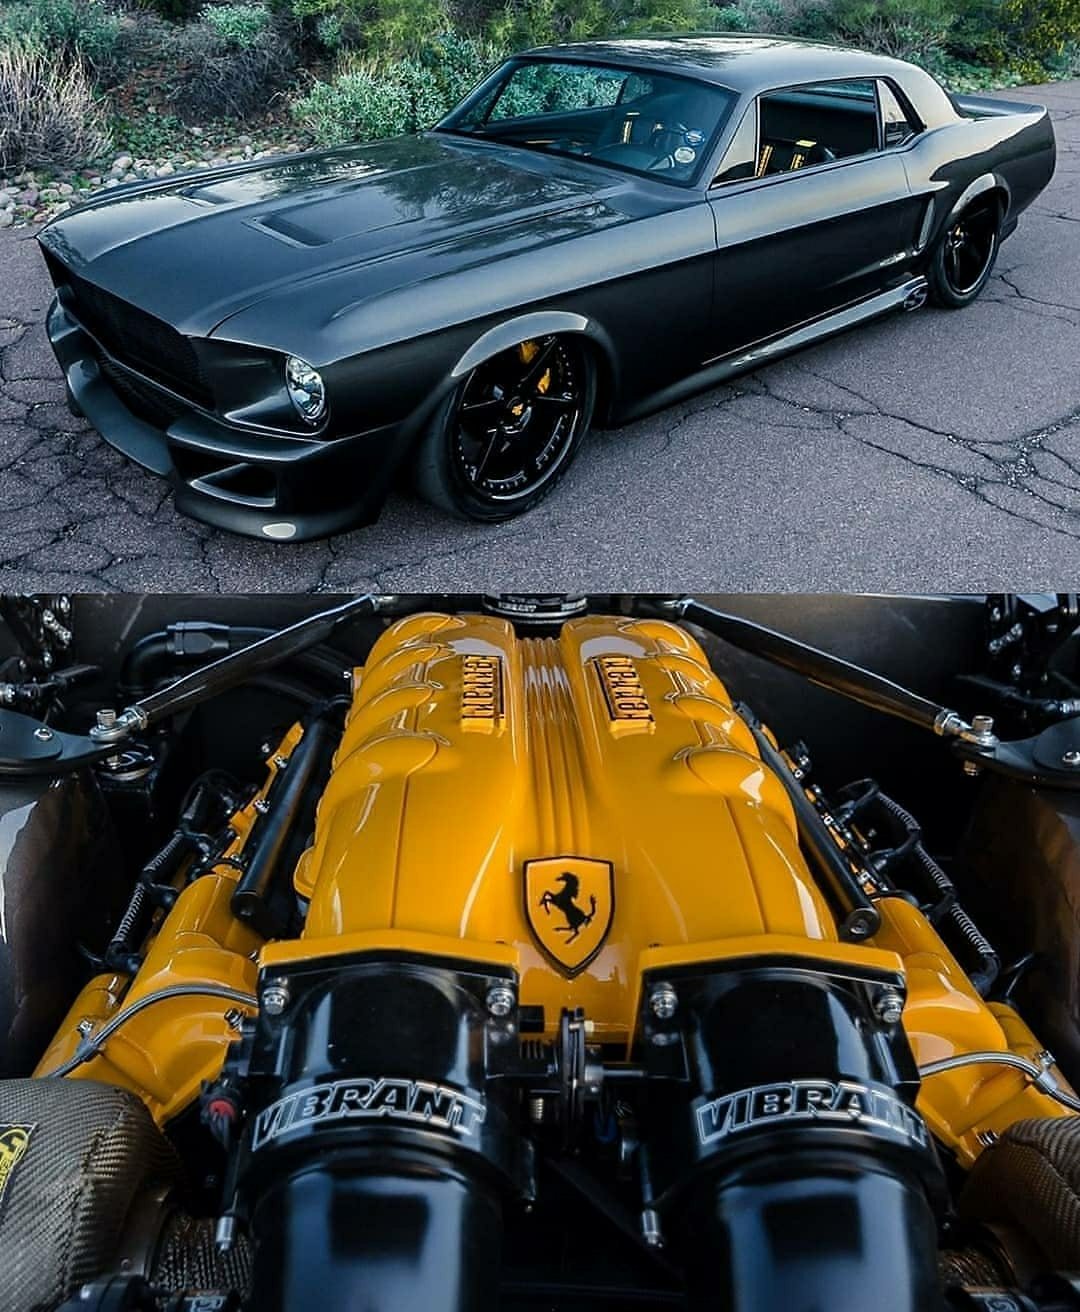 68 Mustang with a twin turbo Ferrari engine